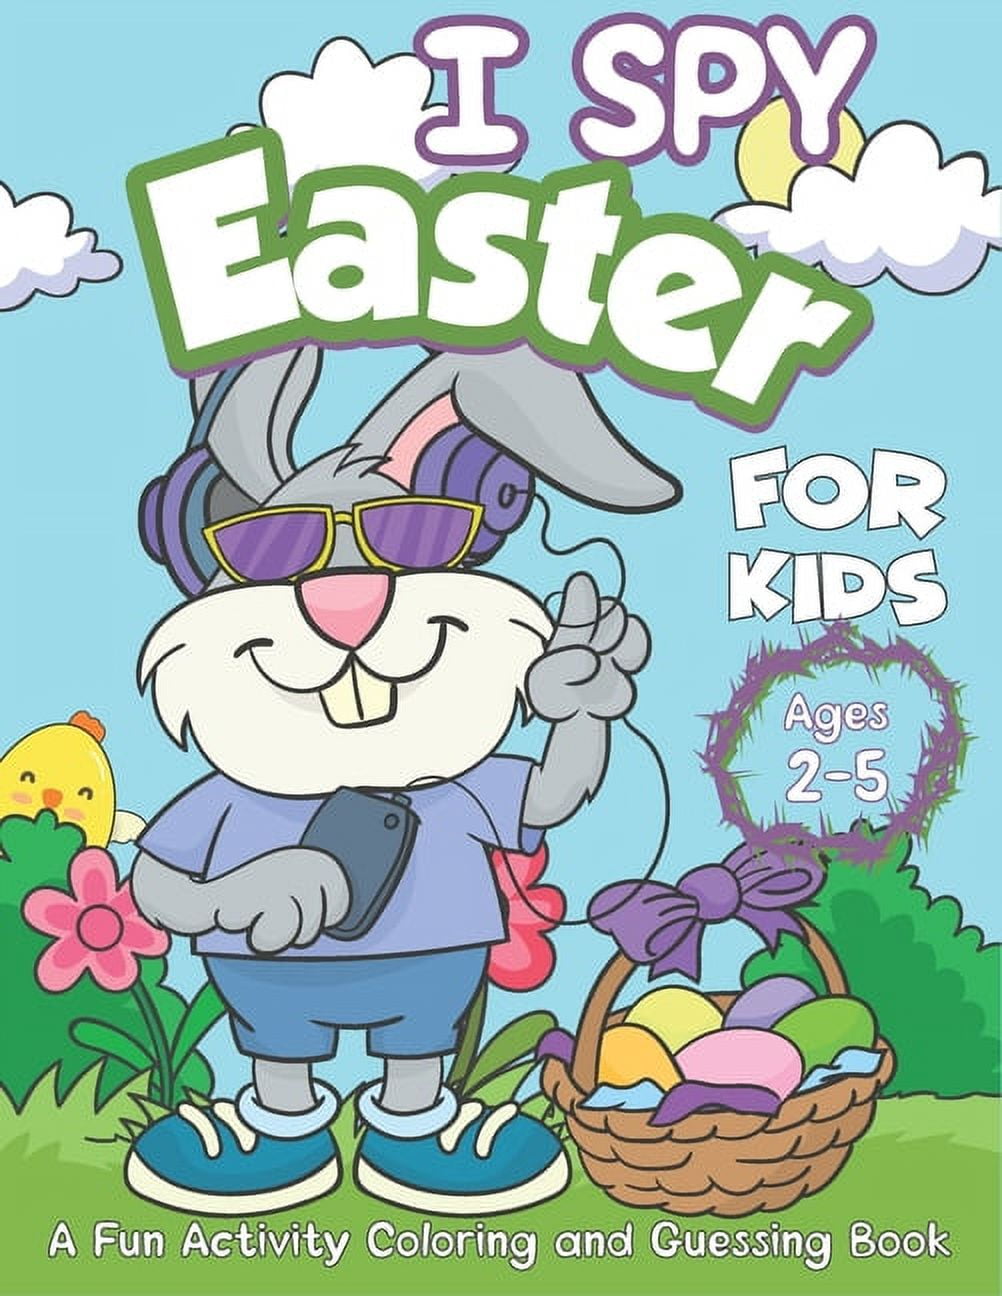 Easter Basket Stuffers : I Spy Easter: Book for Kids Ages 2-5: A Fun &  Interactive Activity Easter Day Coloring And Guessing Game For Little Kids,   Girls (Easter Basket Stuffers for